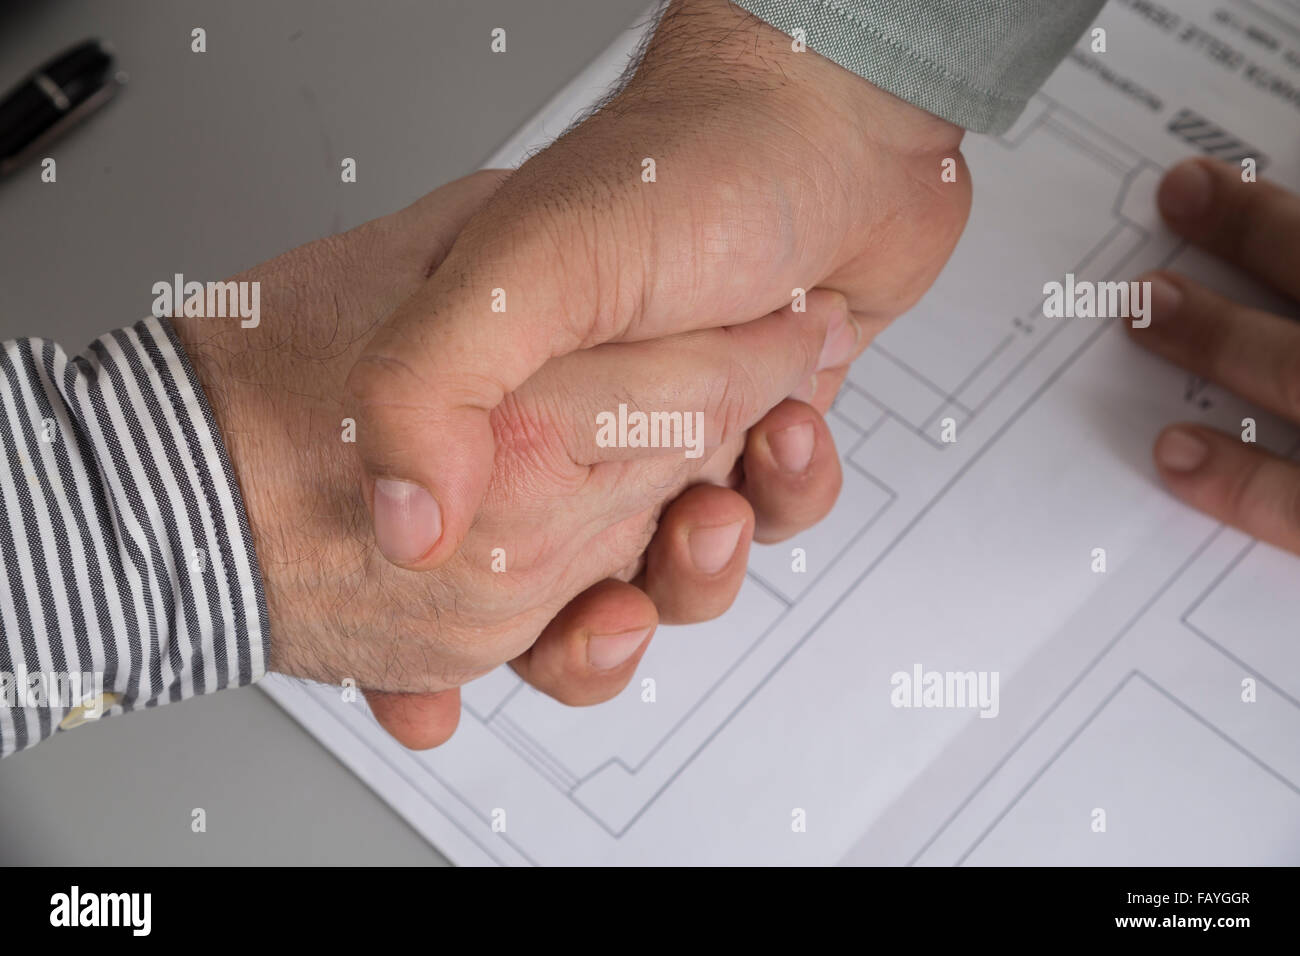 Handshake on a project Stock Photo